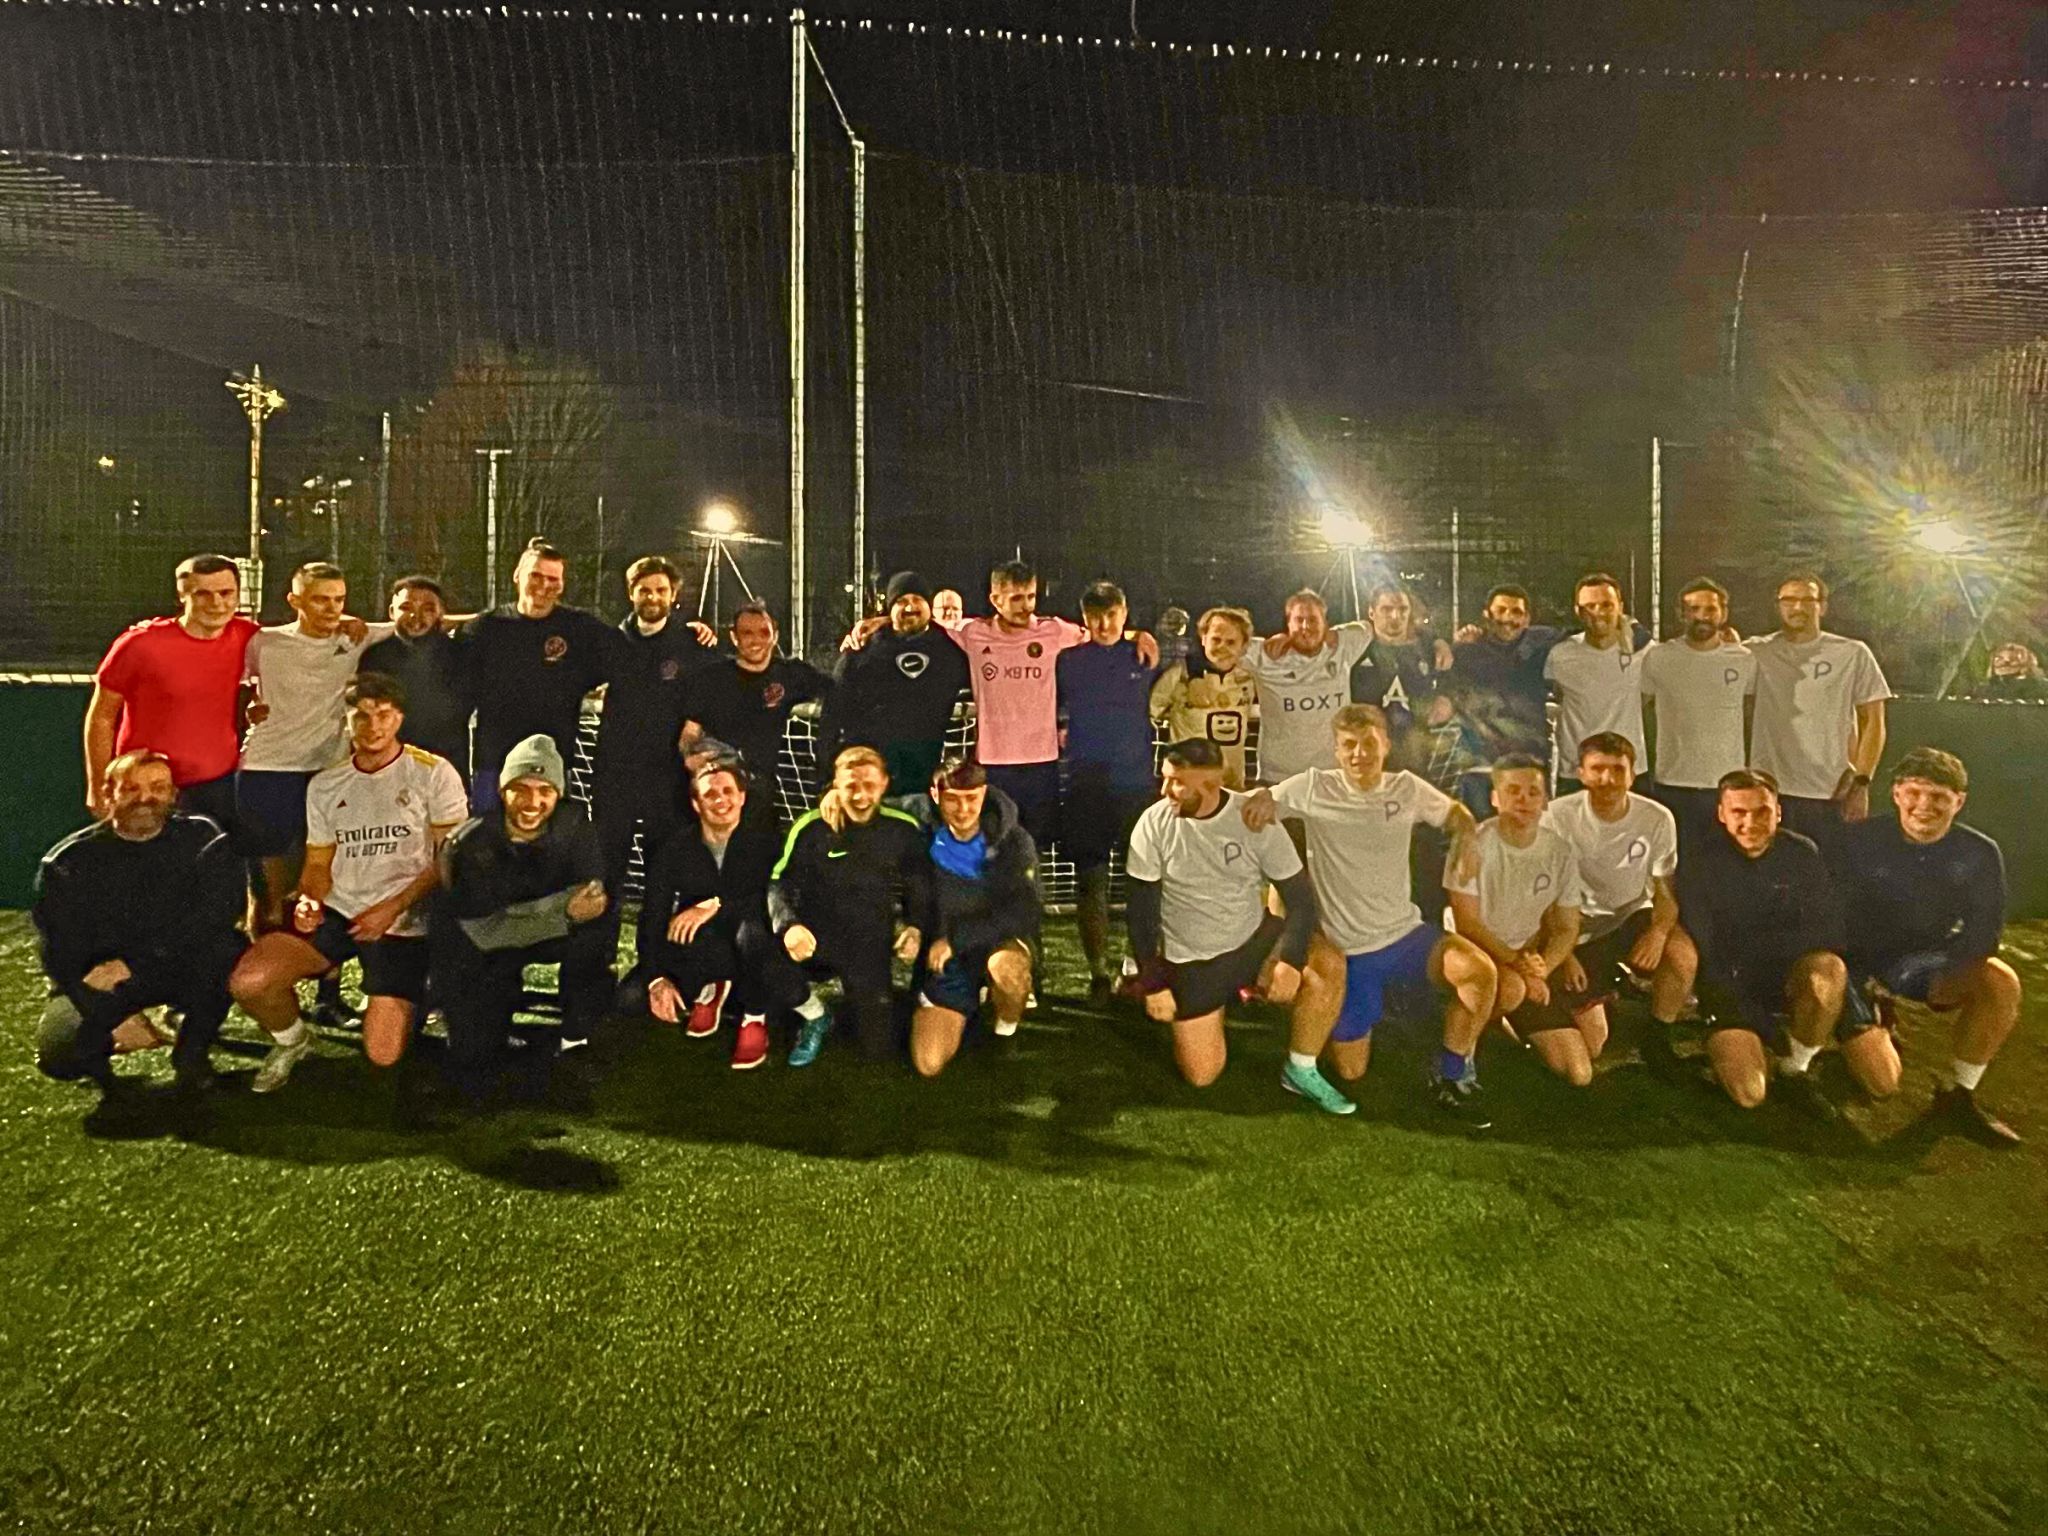 Football, fun and fundraising: Our five-a-side charity tournament